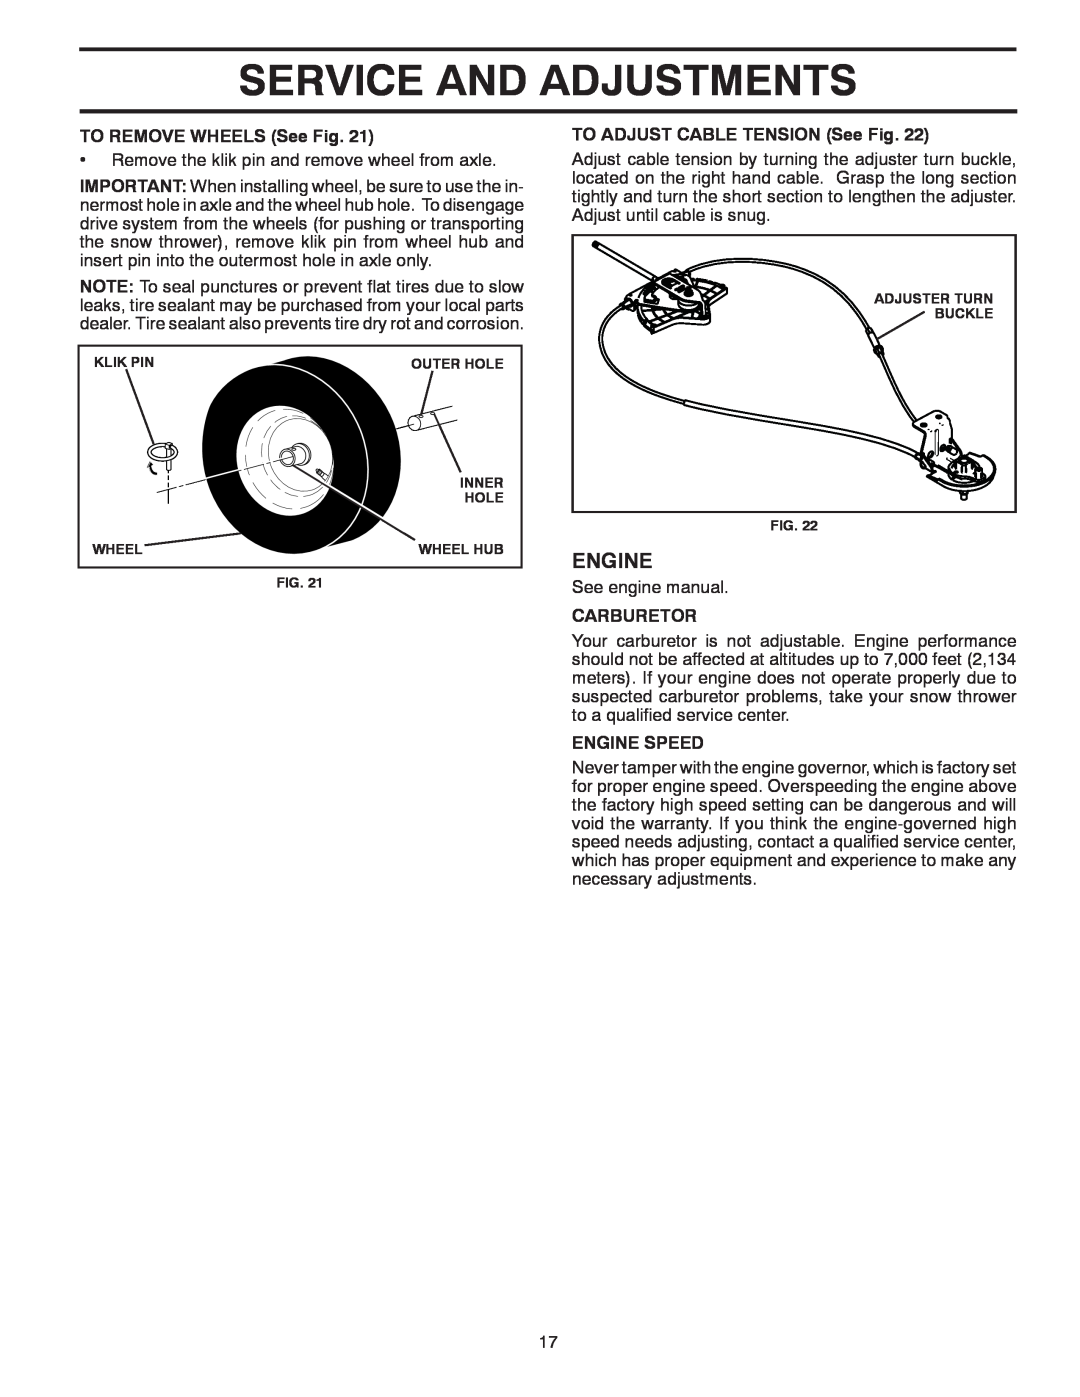 Poulan 96192004501 Service And Adjustments, Engine, TO REMOVE WHEELS See Fig, TO ADJUST CABLE TENSION See Fig, Carburetor 